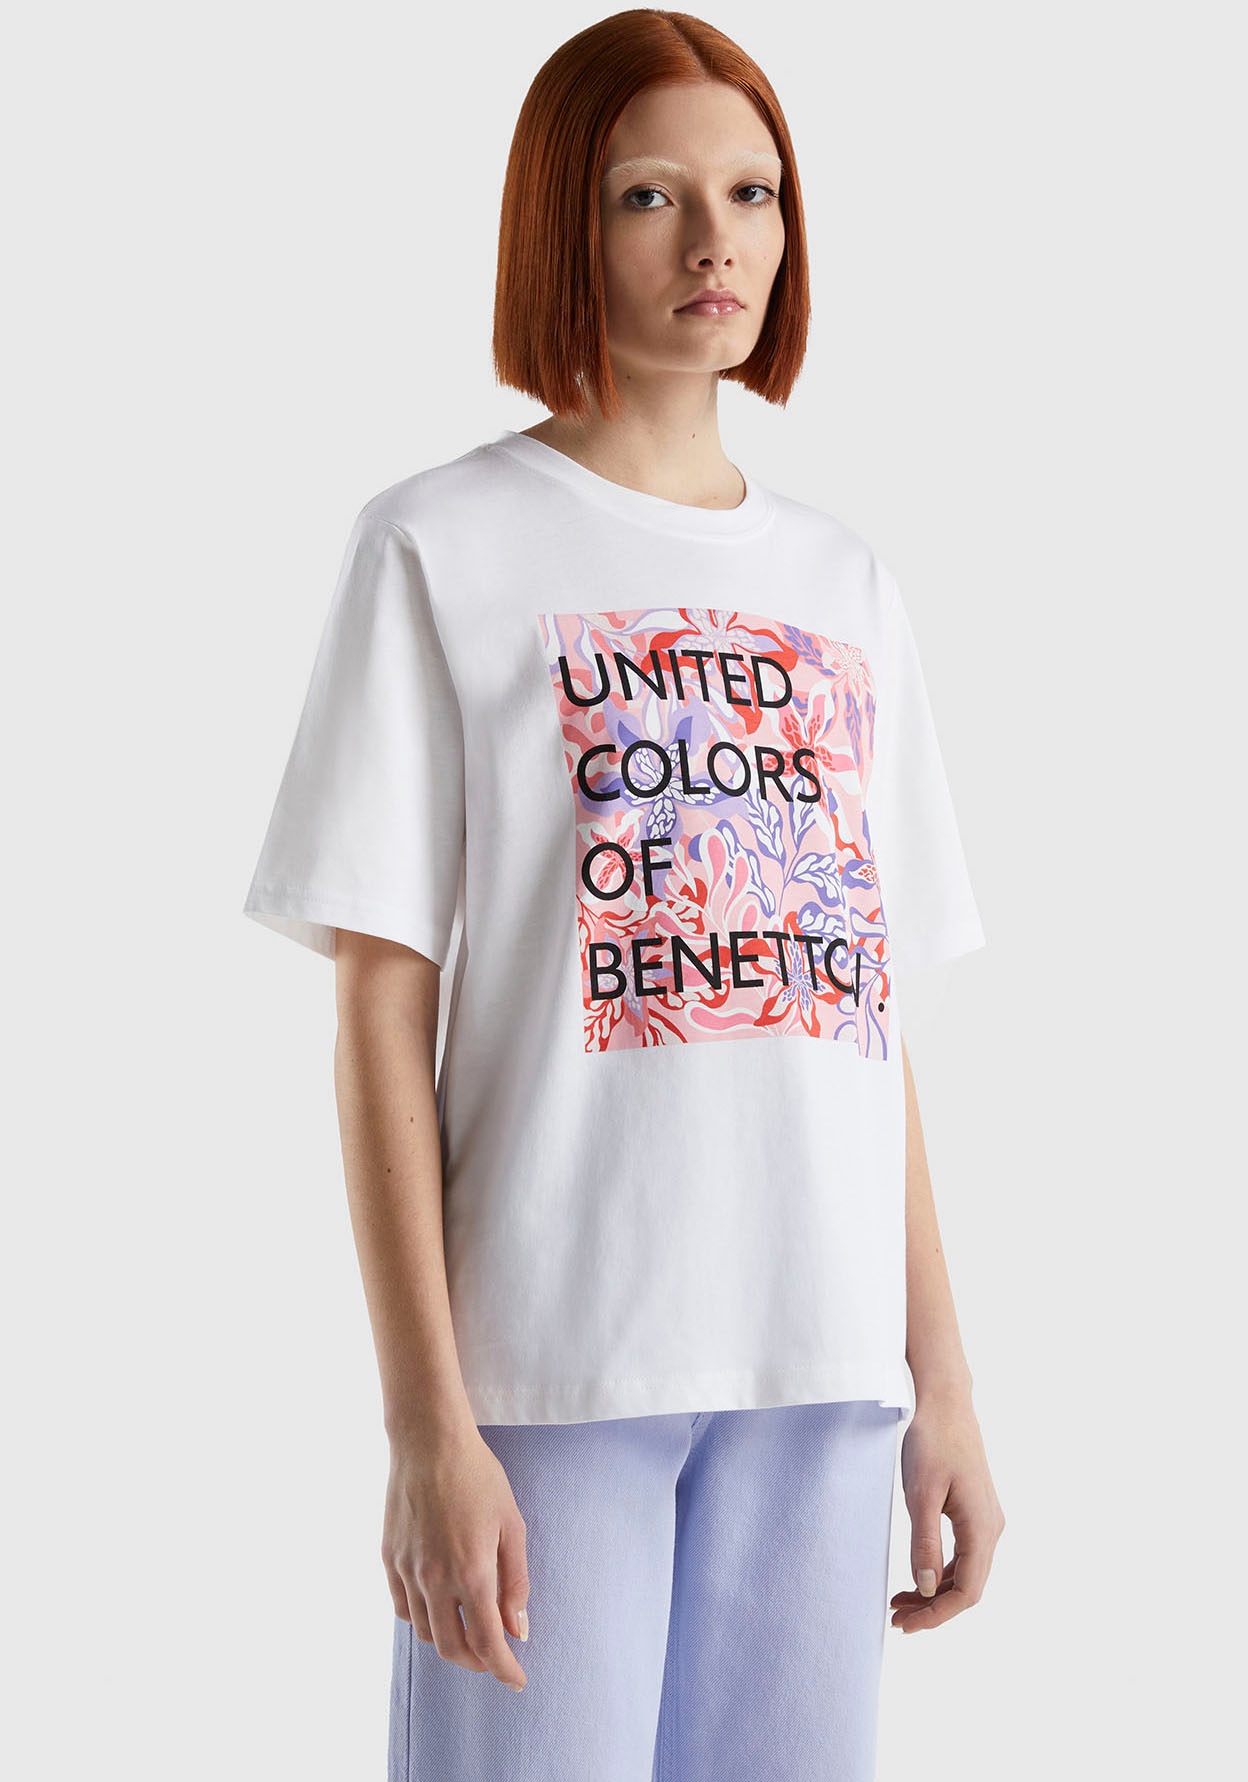 United Colors ♕ of T-Shirt Benetton bei